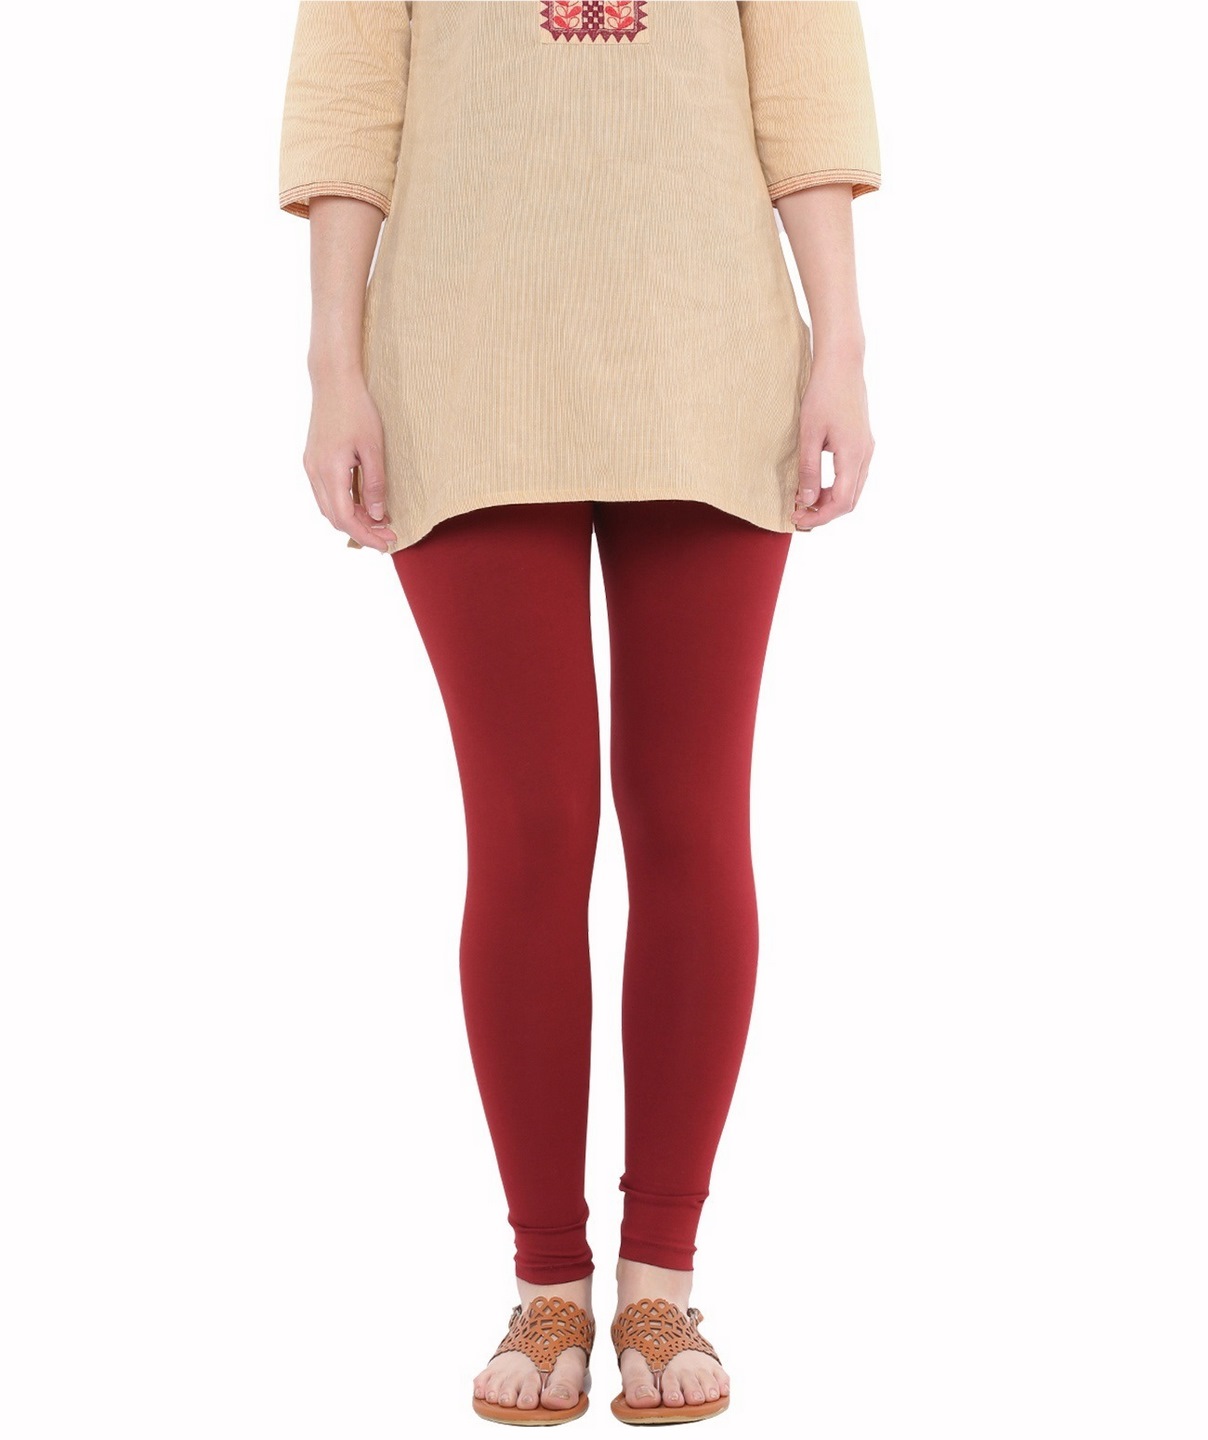 Buy Dollar Missy Women's Cotton Slim Fit Lovely Red And Yellow Color Ankle  Length Leggings Online at Low Prices in India - Paytmmall.com